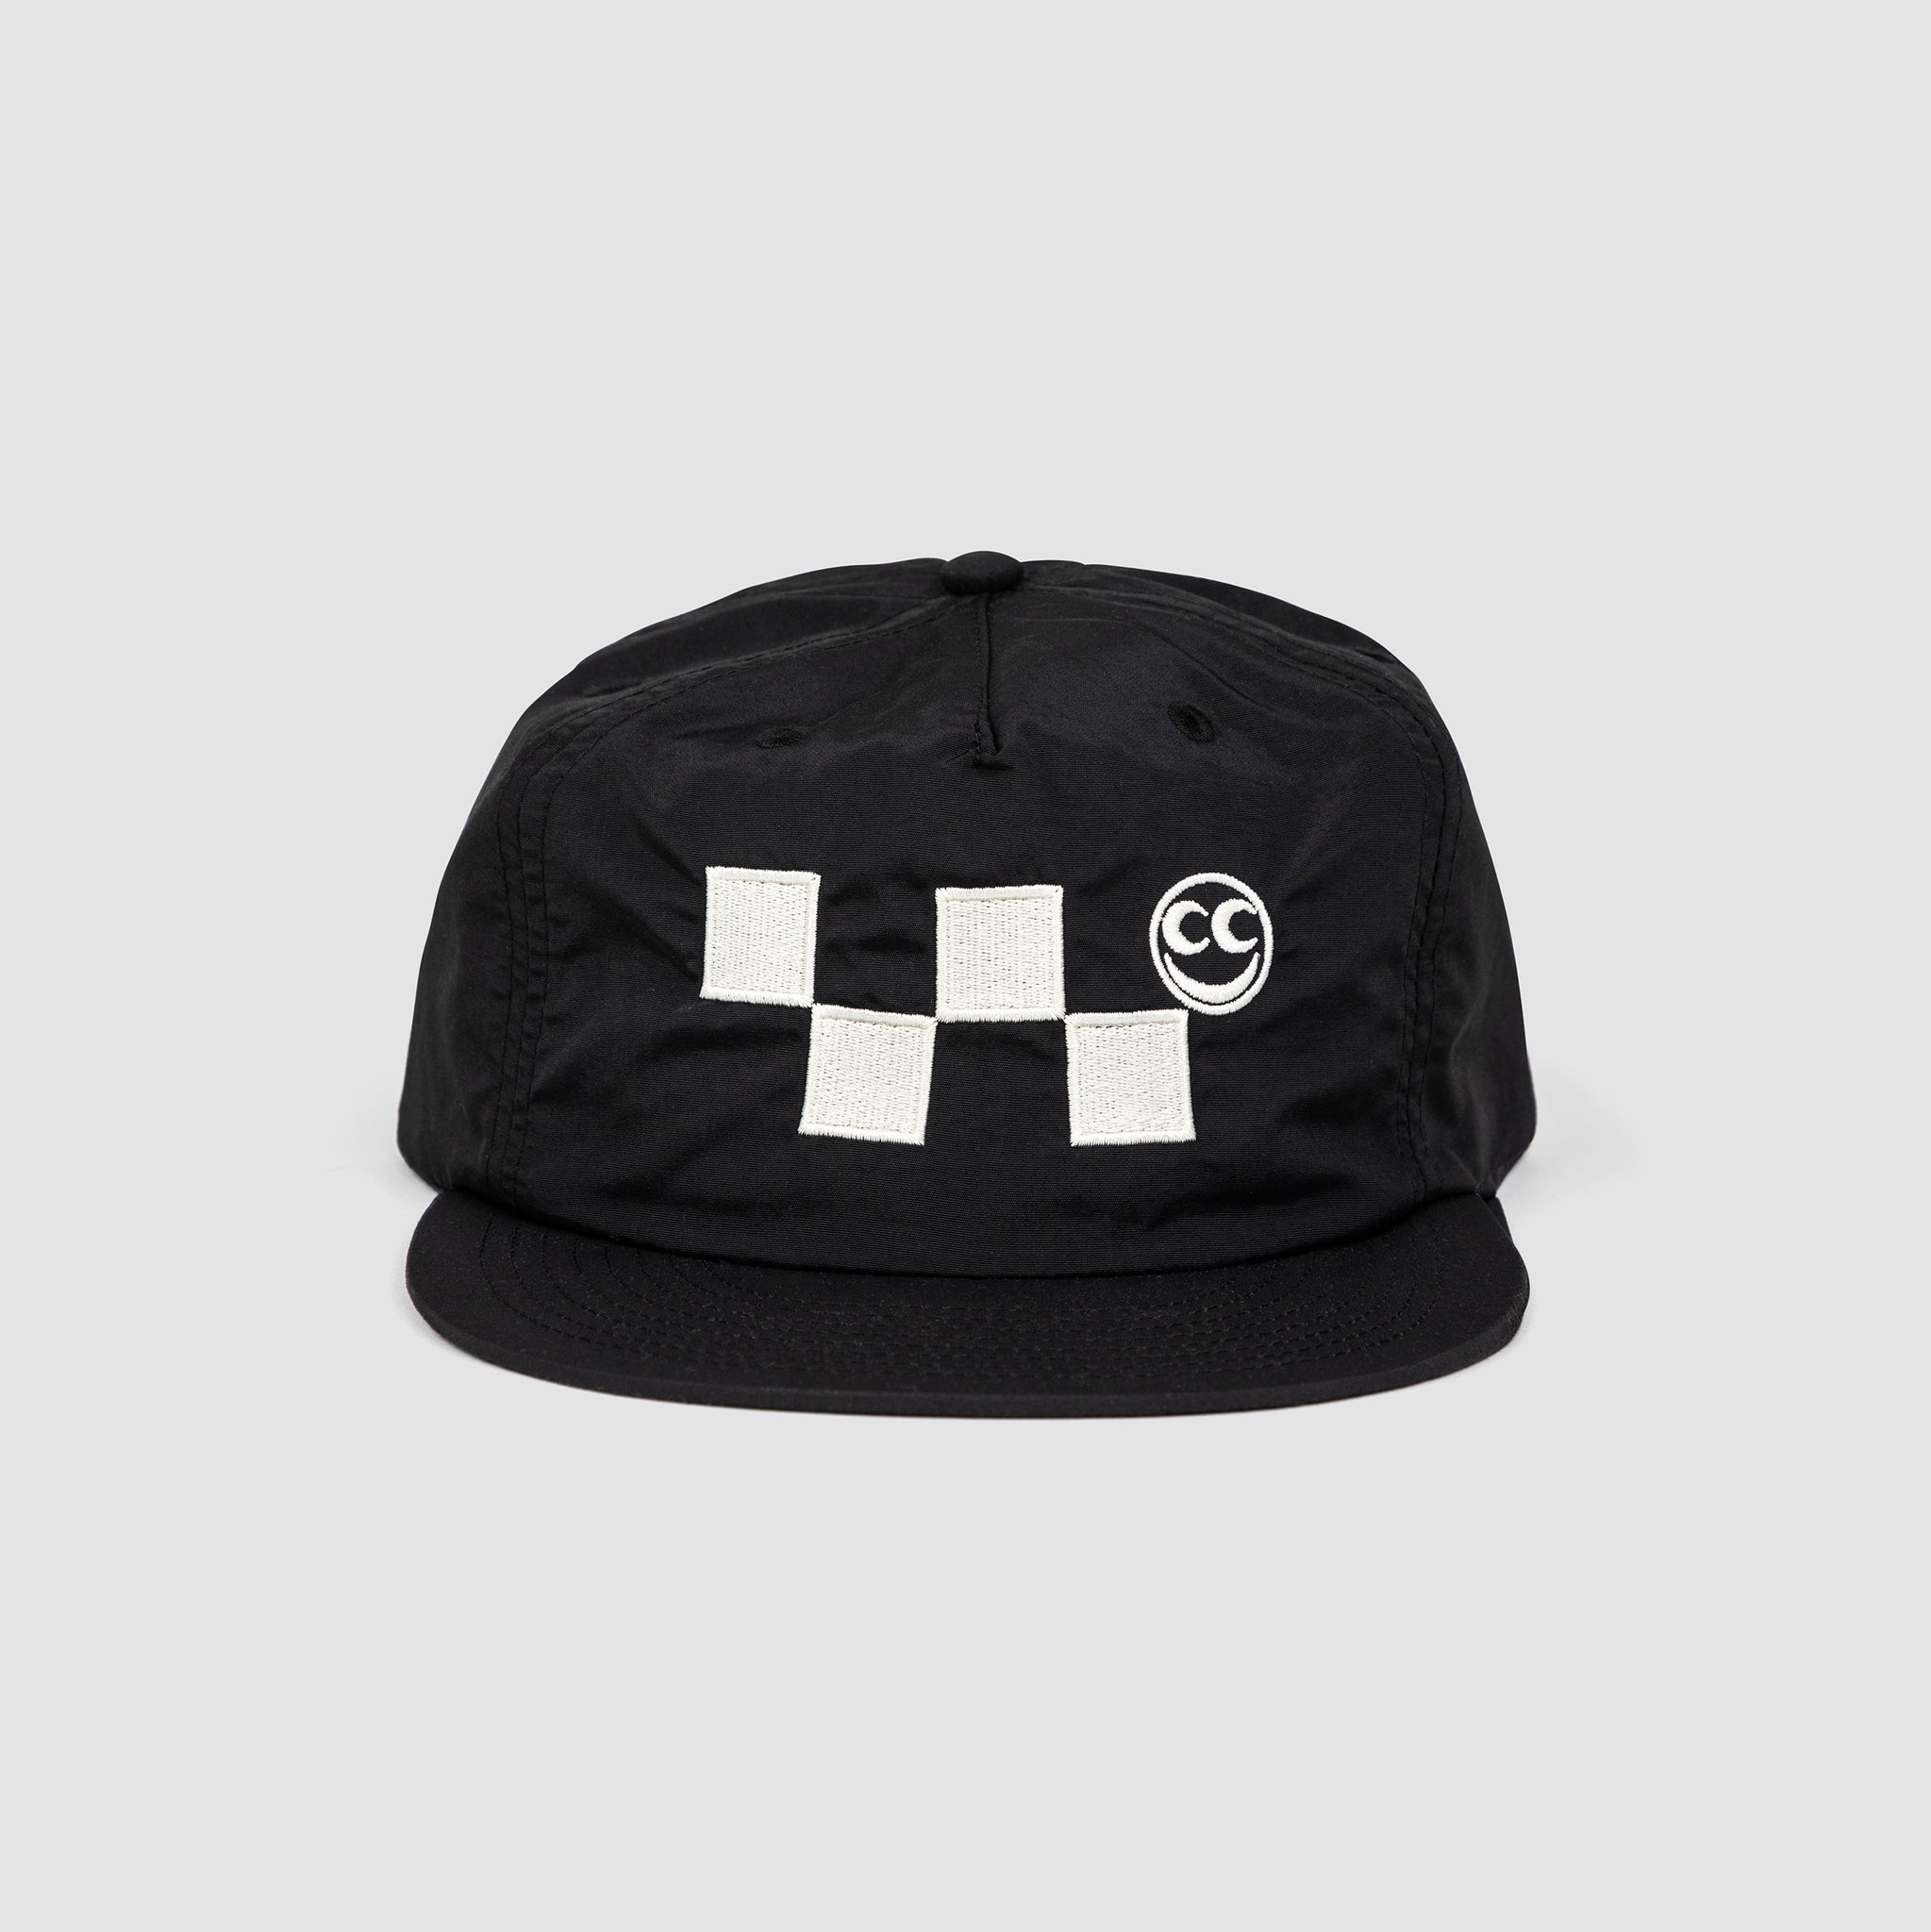 Front shot of black unisex adult surf-style 5-panel hat. White checkered embroidery graphic with white Vern smiley face centered along the front panel of hat.  